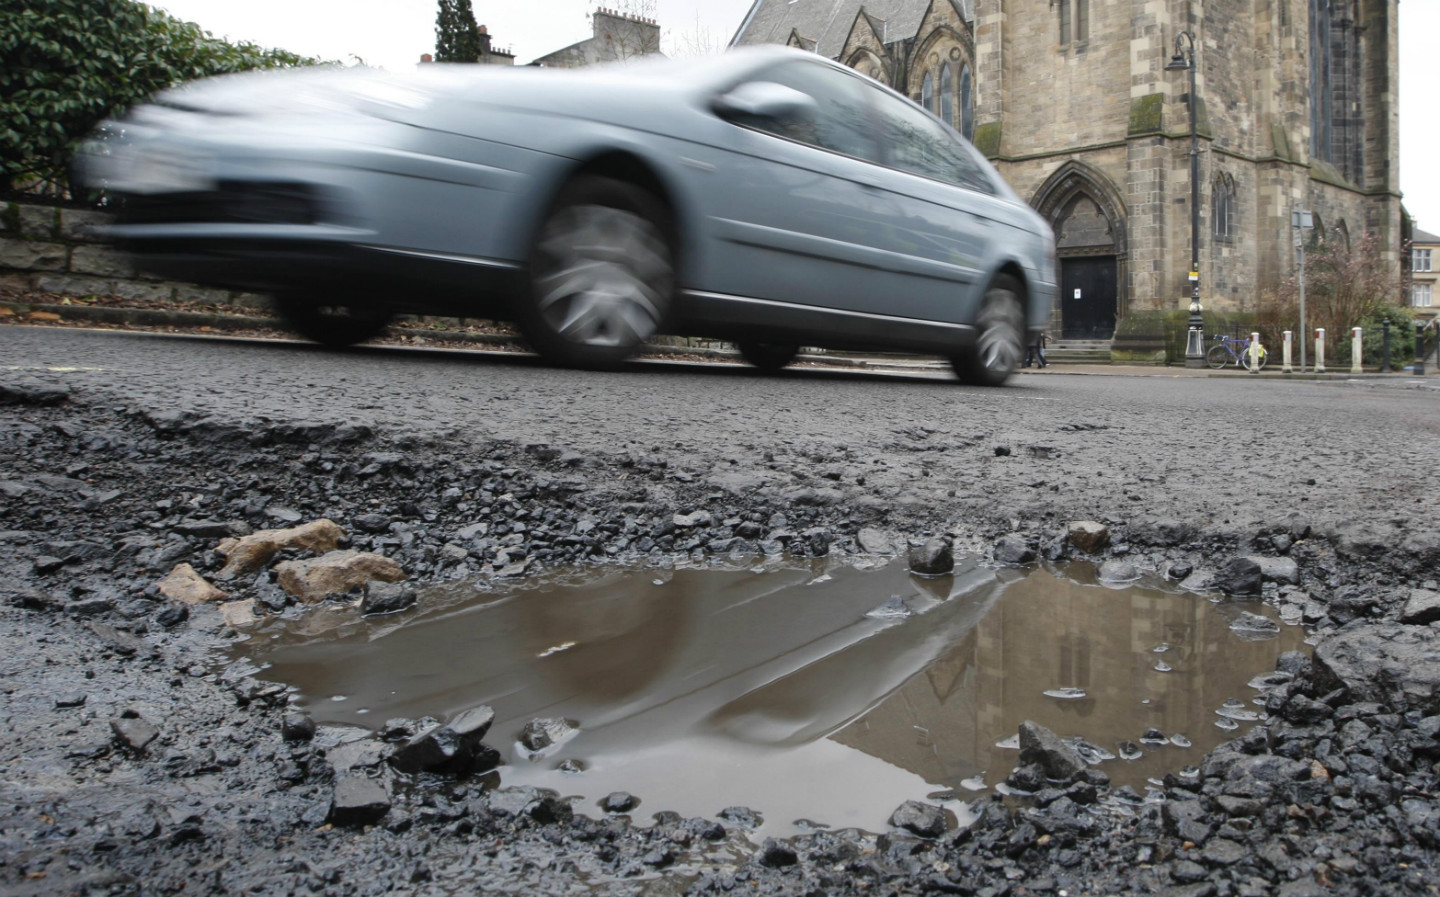 Pothole damage to cars doubles in first three months of 2018